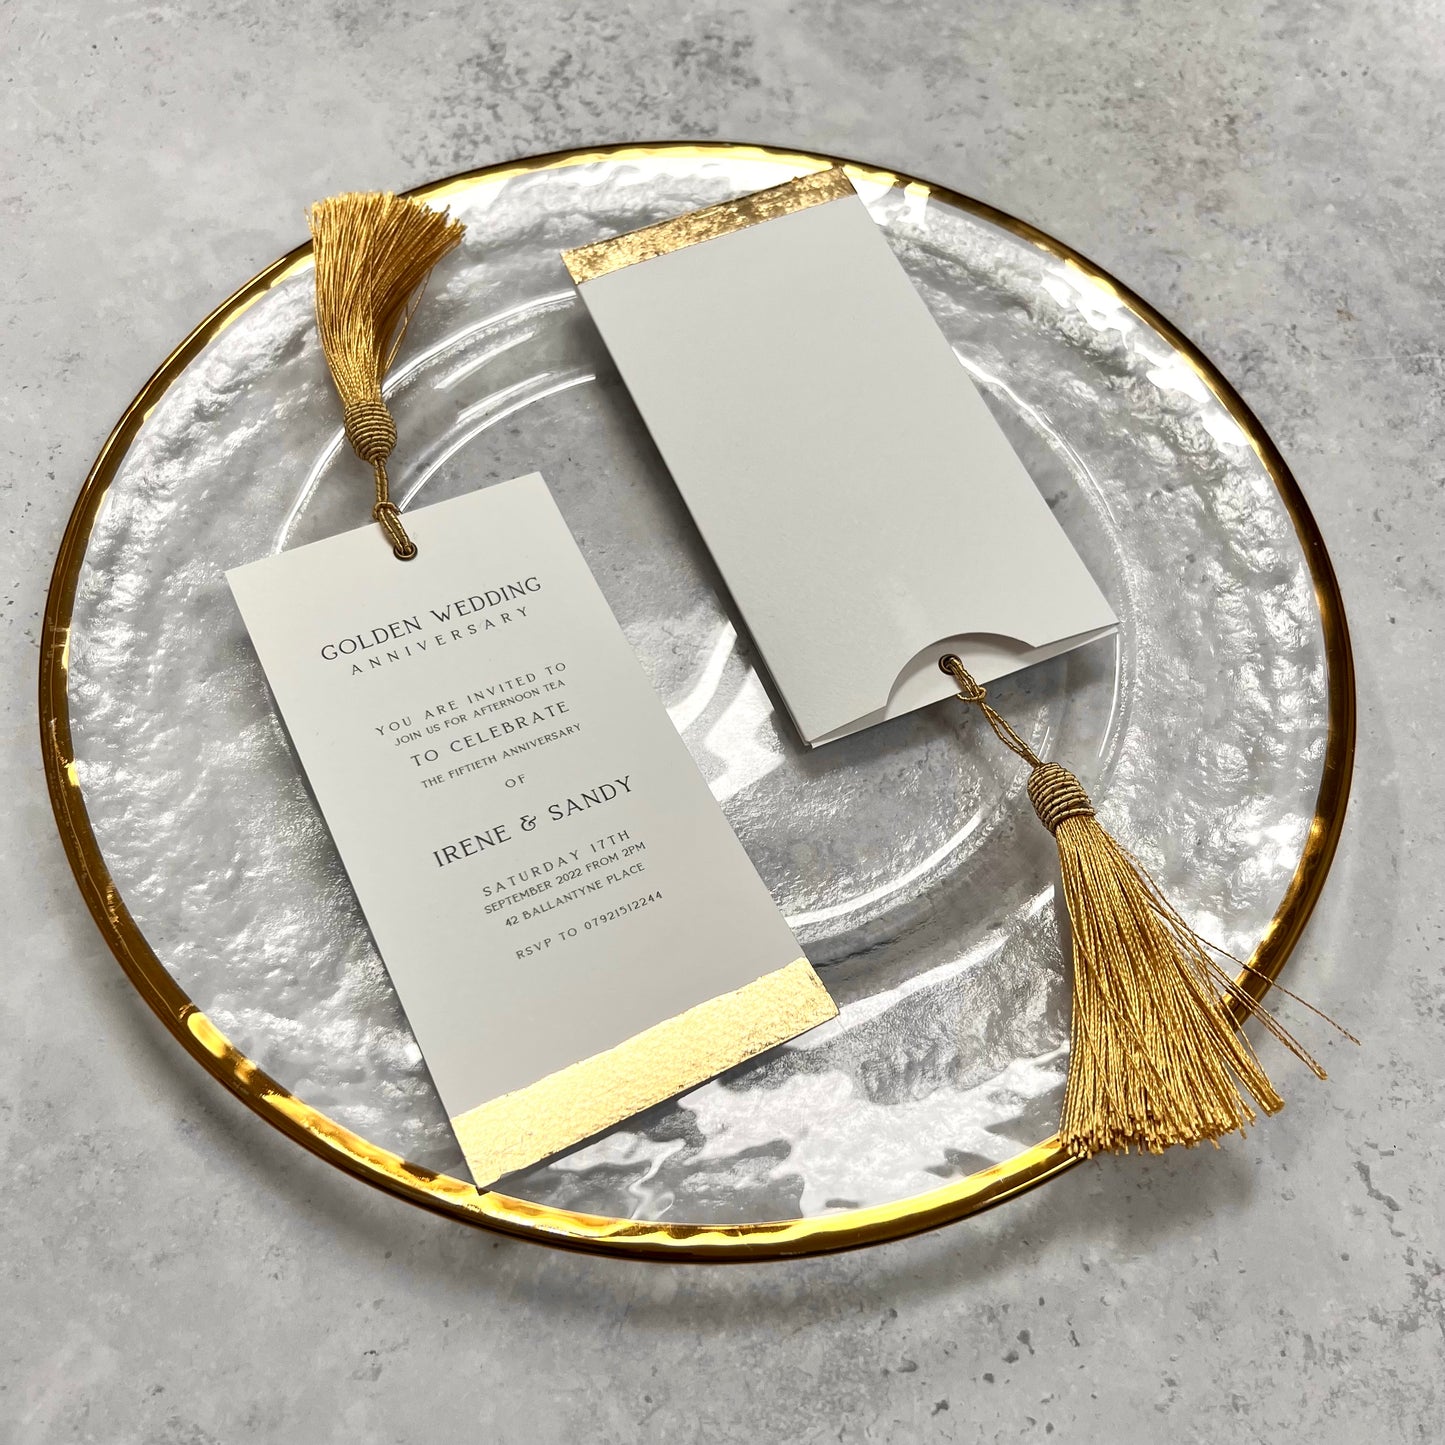 invite with gold tassel and wallet gold foil line at bottom. on gold charger plate 